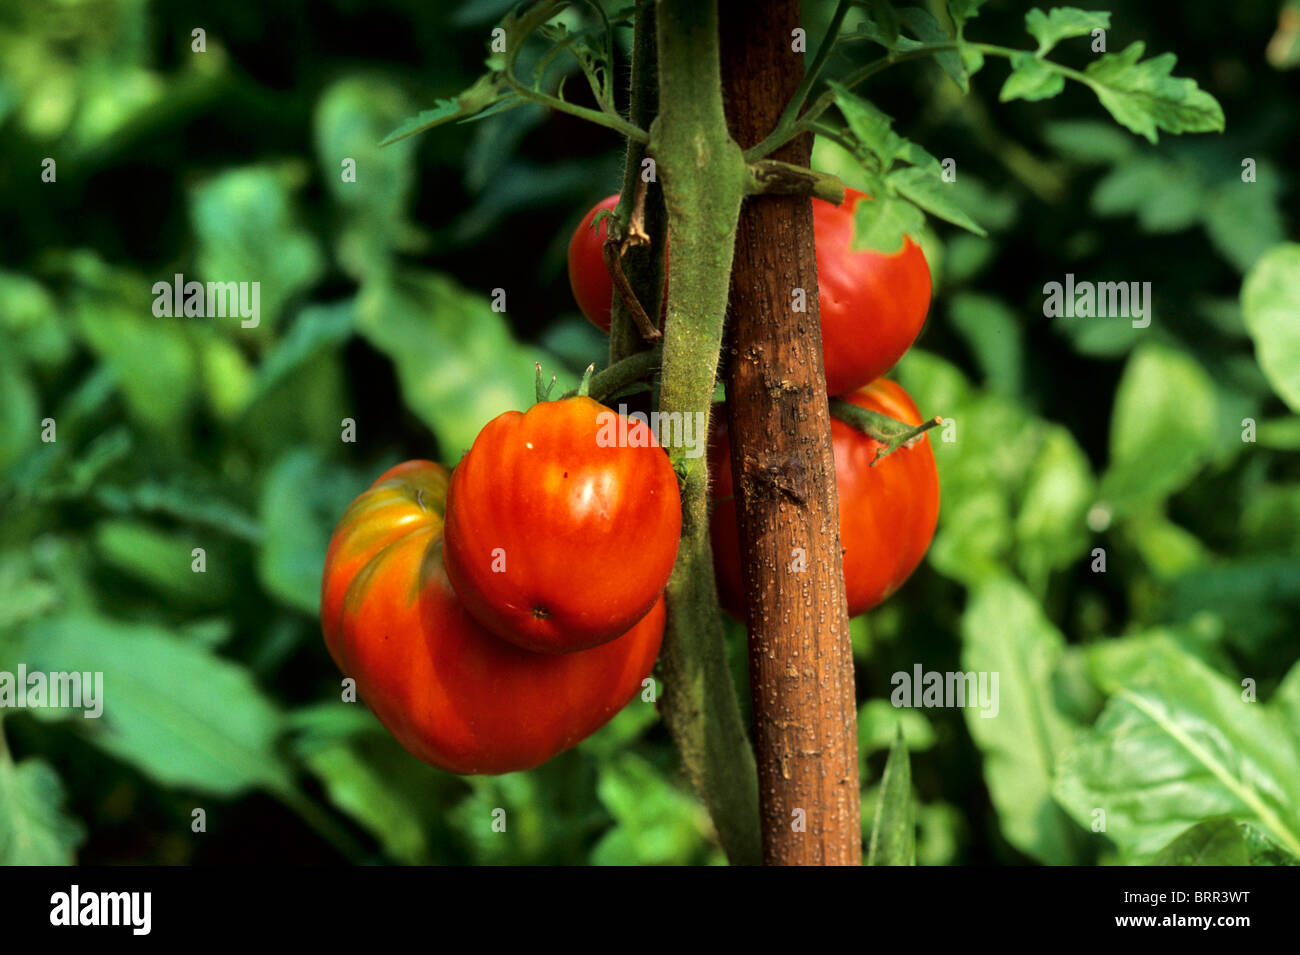 Ripe red tomatoes growing on a vine amongst spinach plants Stock Photo